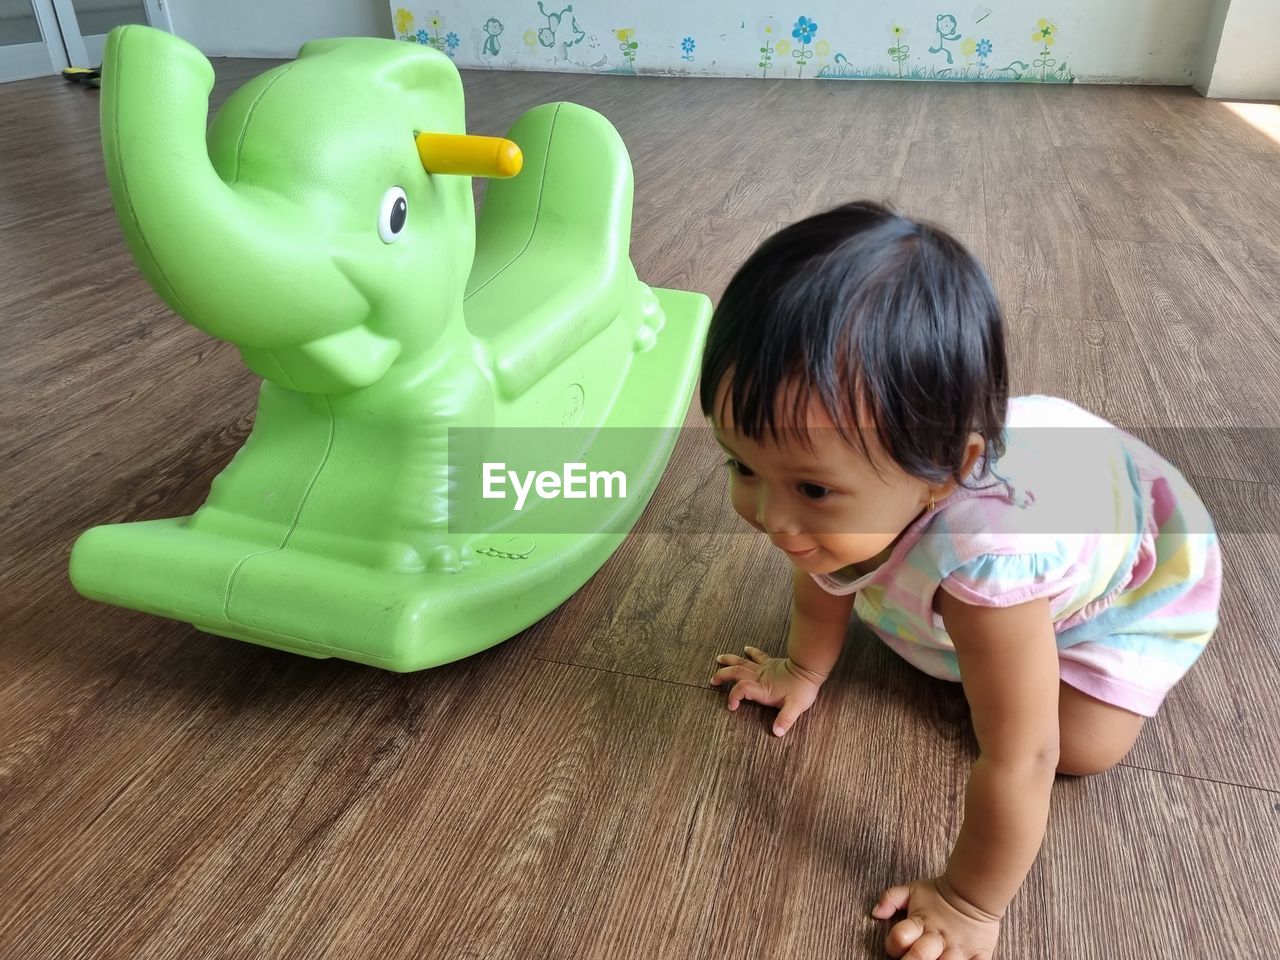 childhood, child, toy, flooring, one person, indoors, green, toddler, innocence, full length, hardwood floor, animal representation, person, baby, baby toys, cute, fun, high angle view, female, black hair, representation, home interior, lifestyles, wood, human head, happiness, domestic life, casual clothing, looking